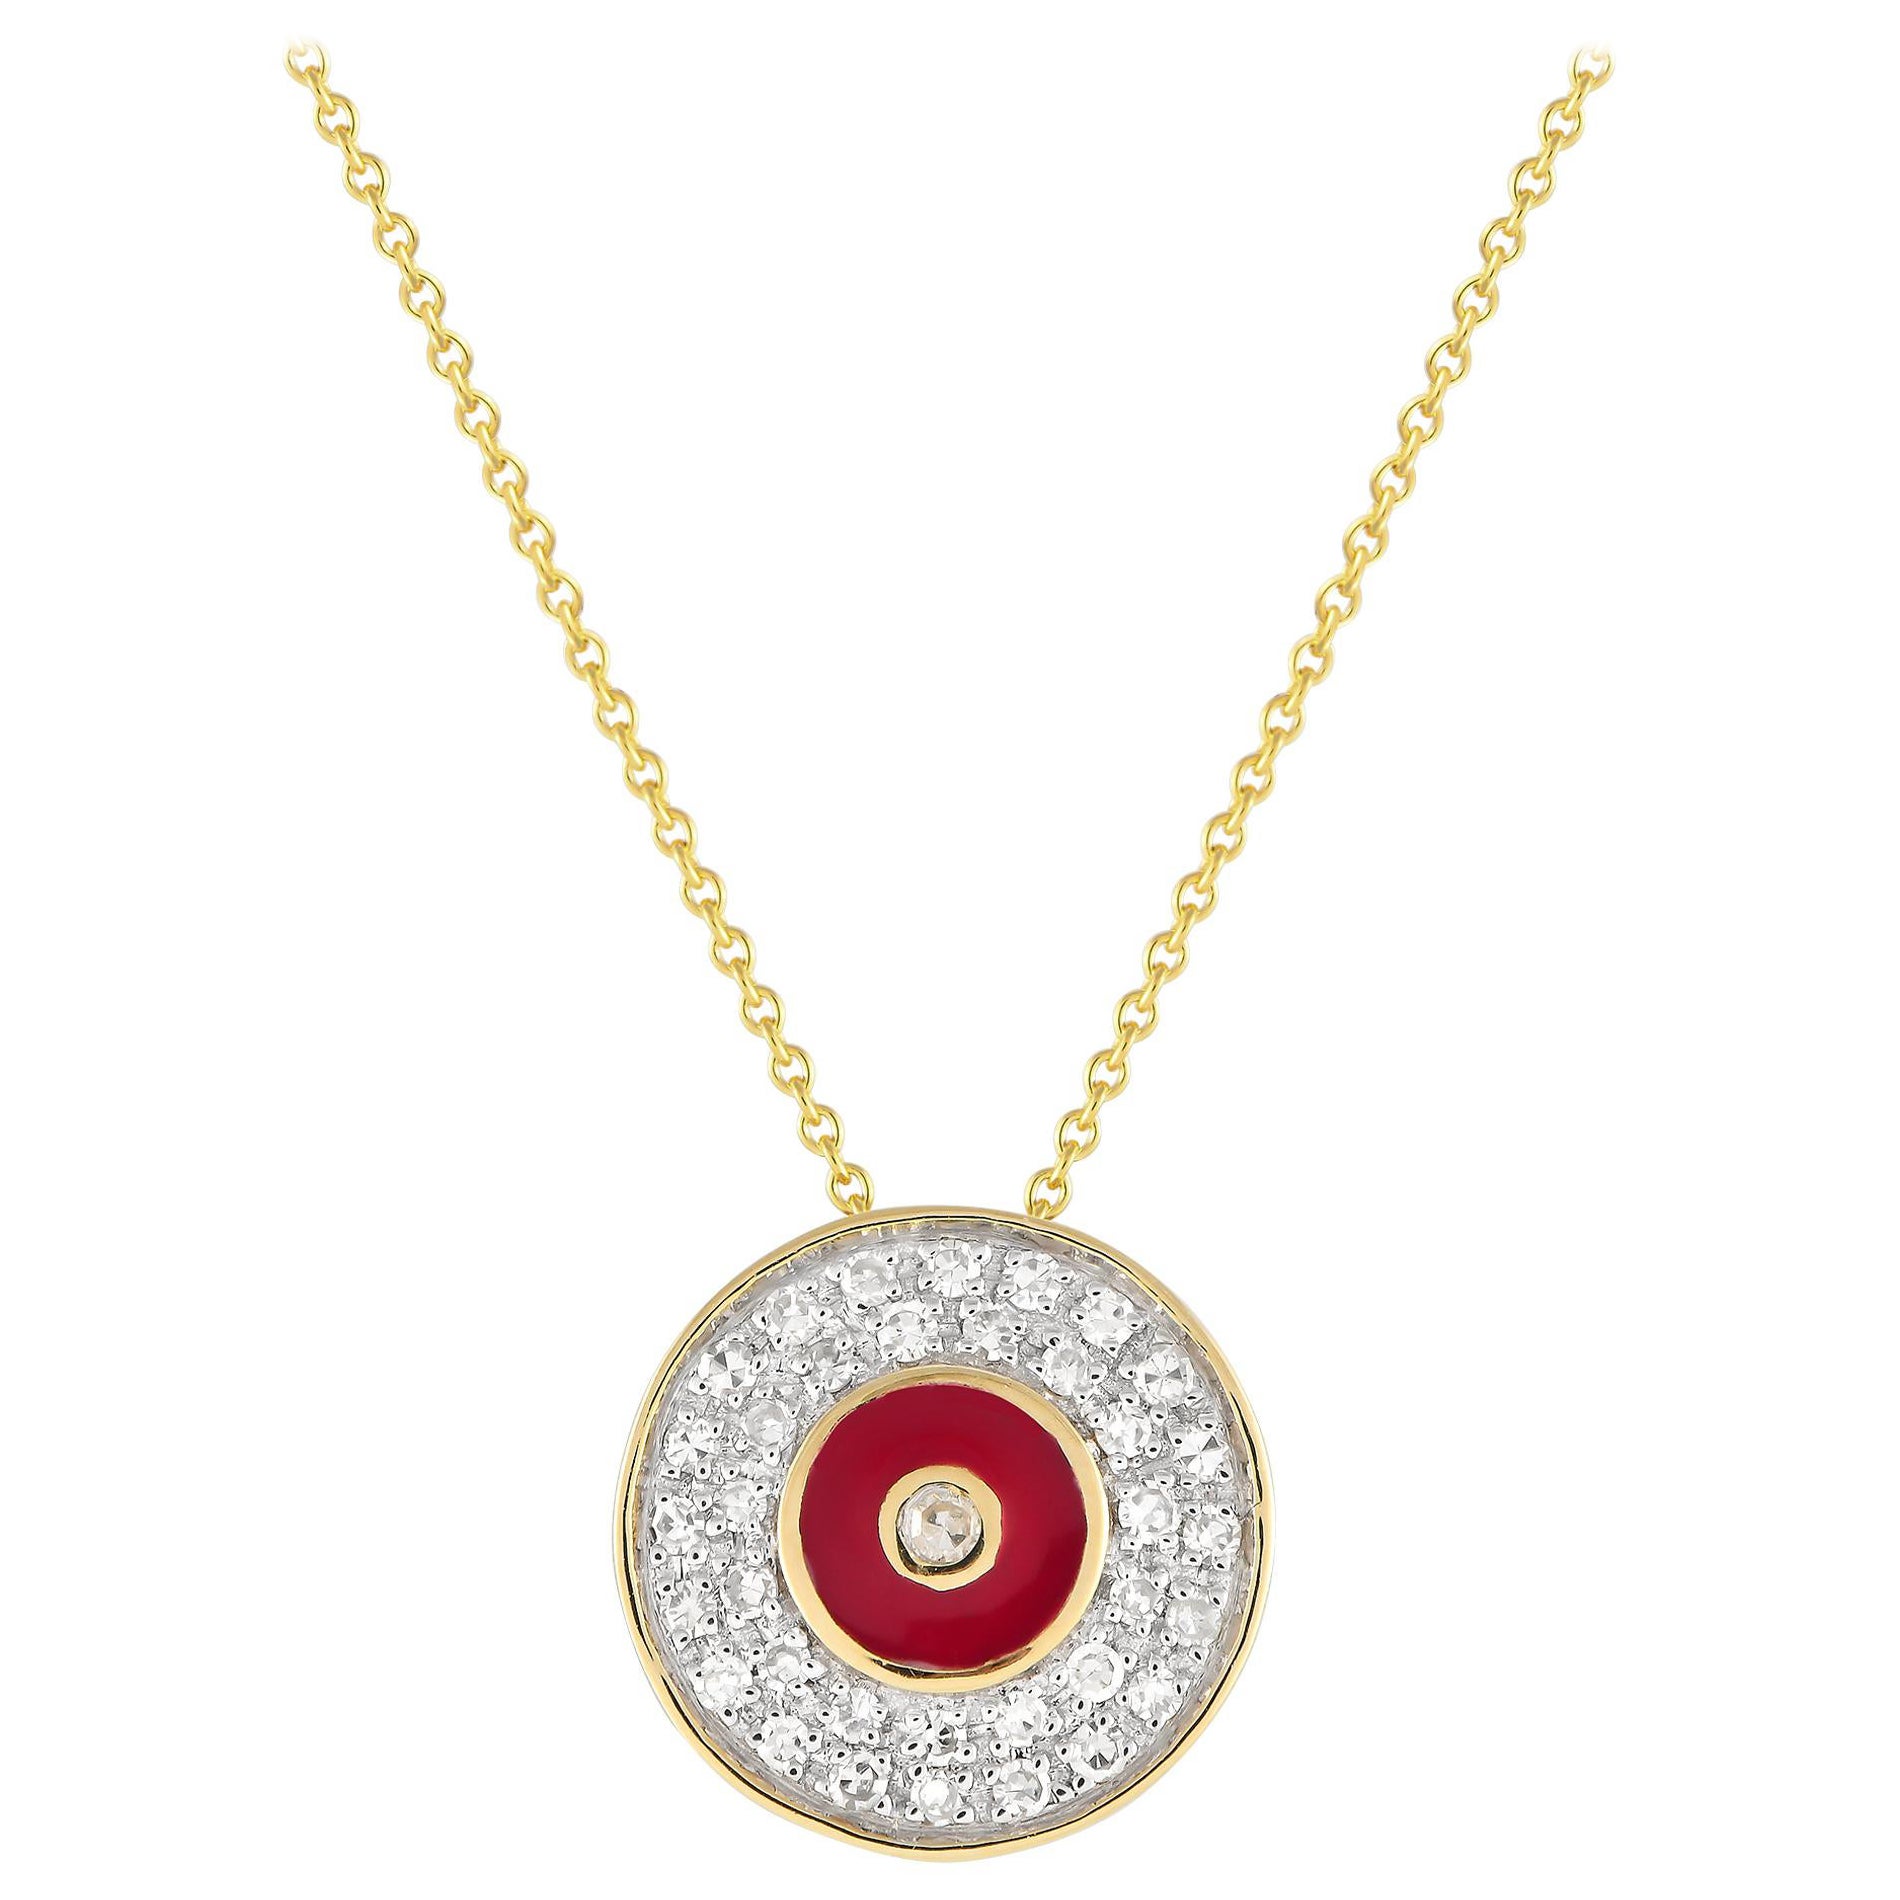 LB Exclusive 14K Yellow Gold 0.20ct Diamond Red Disk Necklace P15060 For Sale